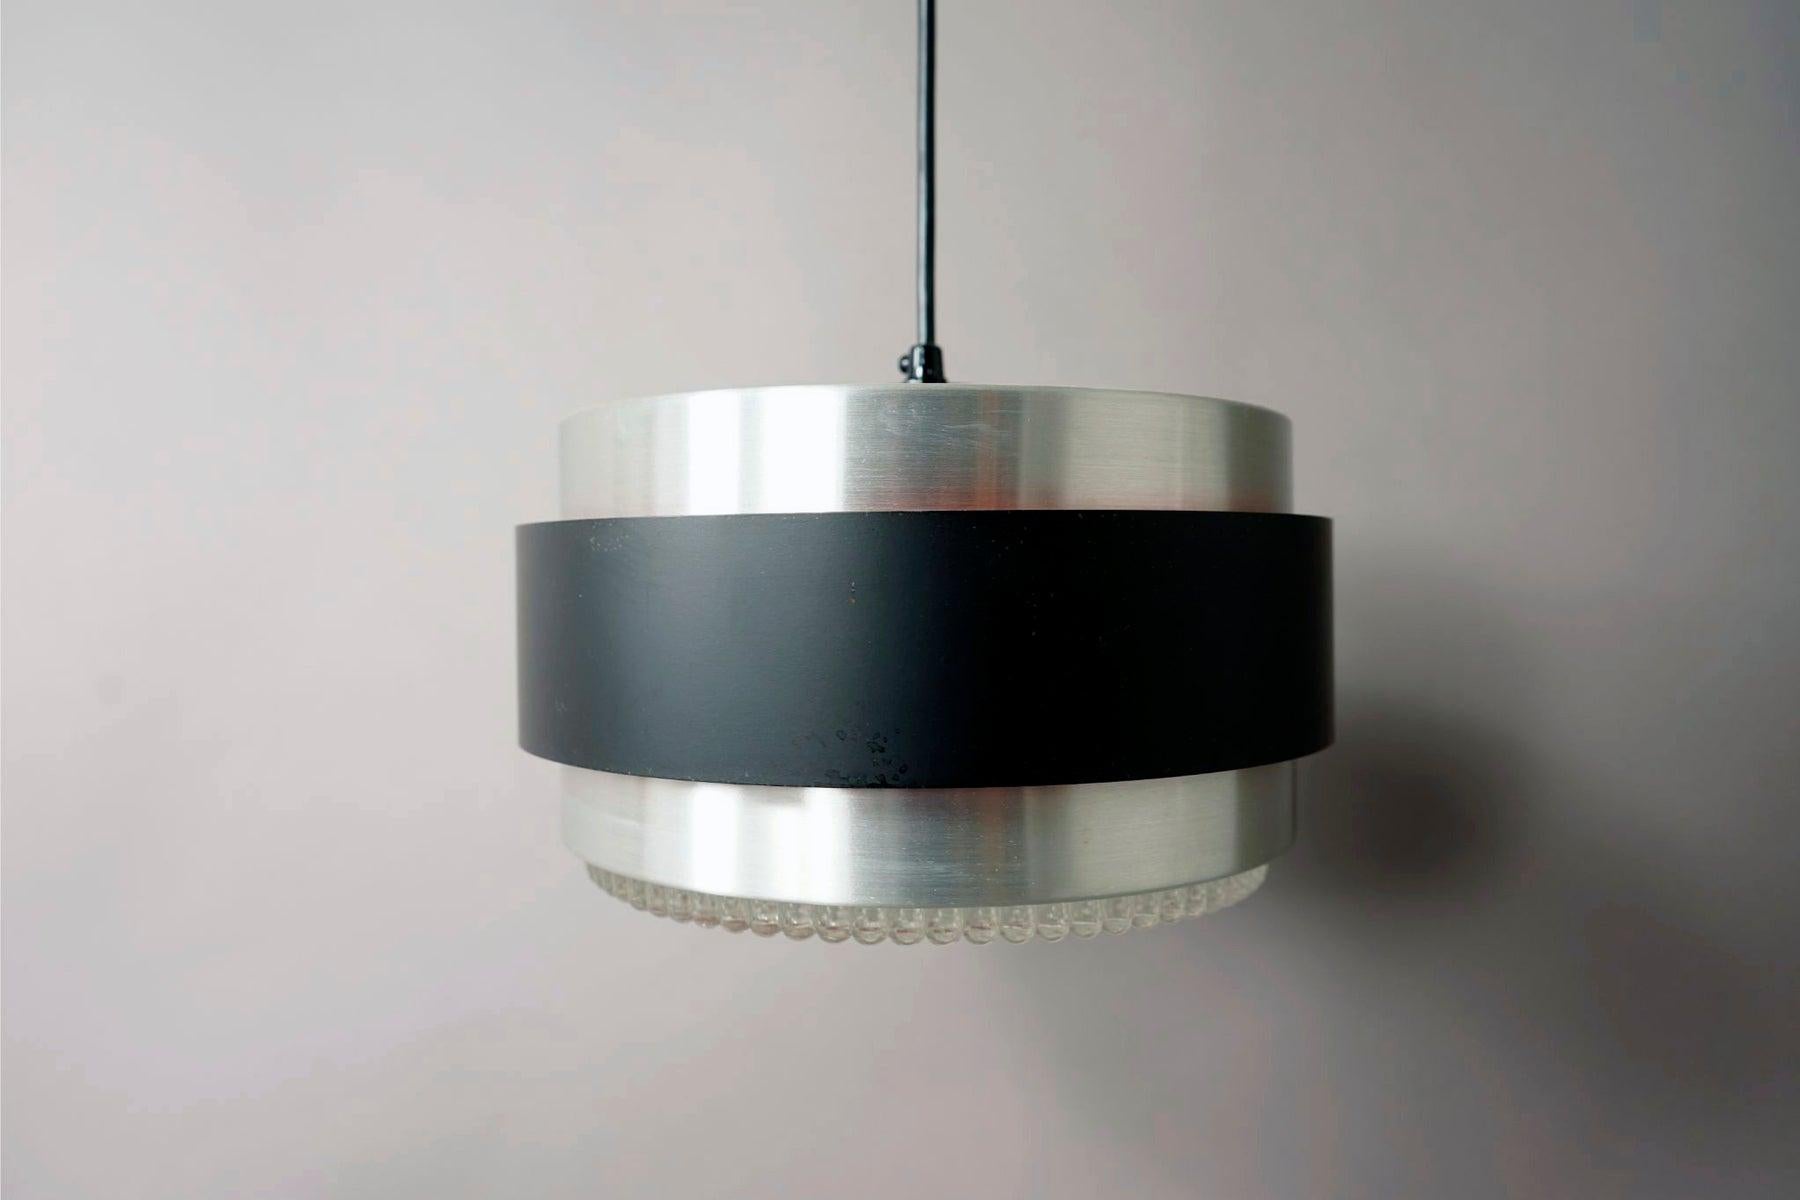 Metal and glass Danish modern pendant light, circa 1960's. This light features metal shade with original solid cast glass diffuser. Attributed to Jo Hammerborg, this appears to be the Saturn model. Made by Fog & Morup

This light has been re-wired